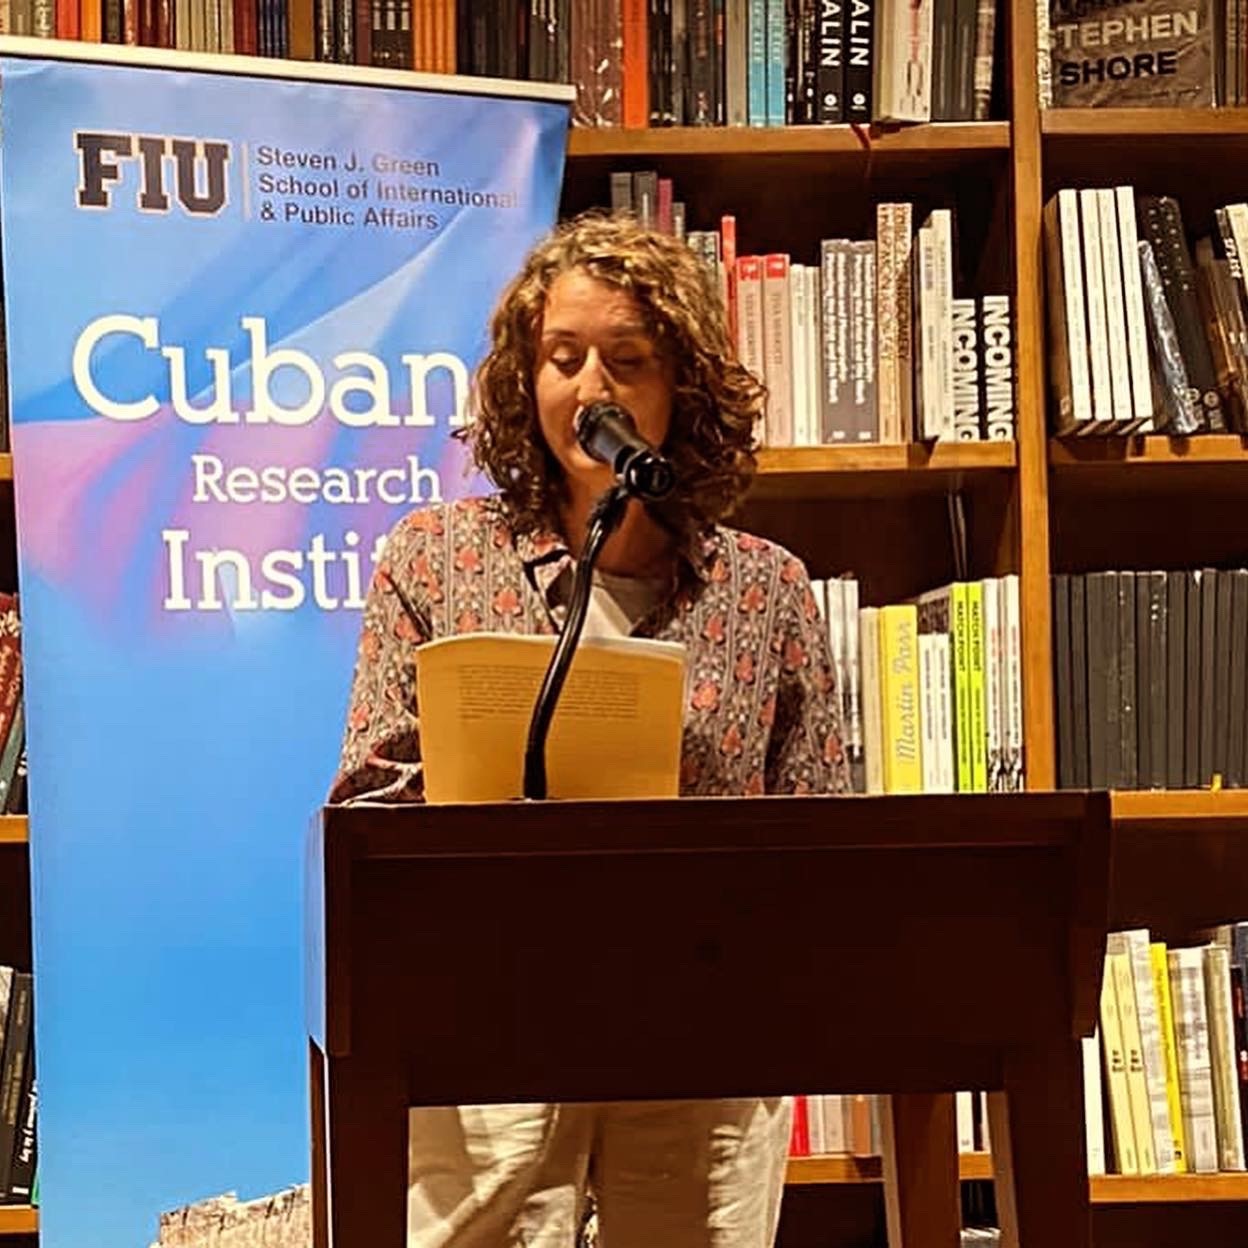 Jennifer Cearns, author of Circulating Culture: Transnational Cuban Networks of Exchange, at a Books & Books event in collaboration with the Cuban Research Institute